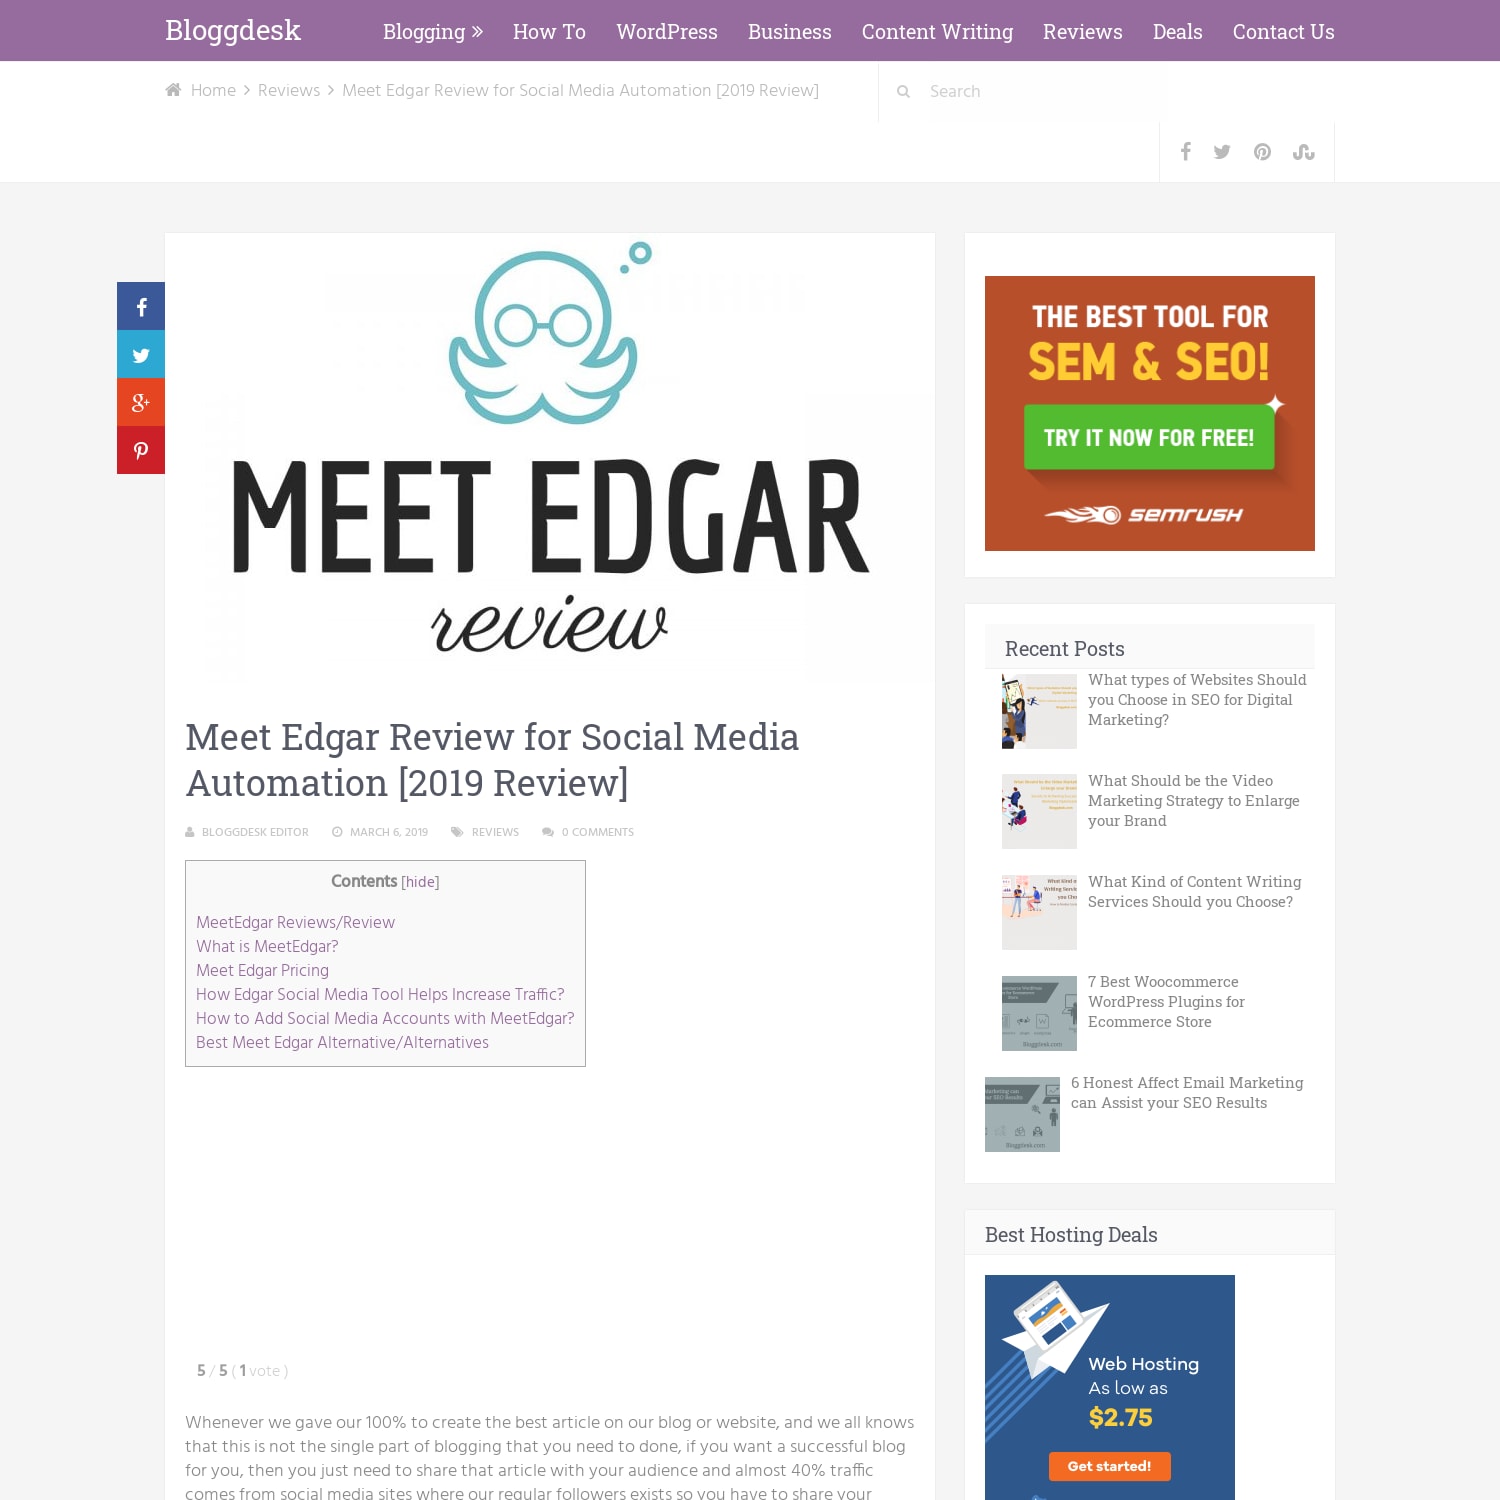 Meet Edgar Review for Social Media Automation [2019 Review]